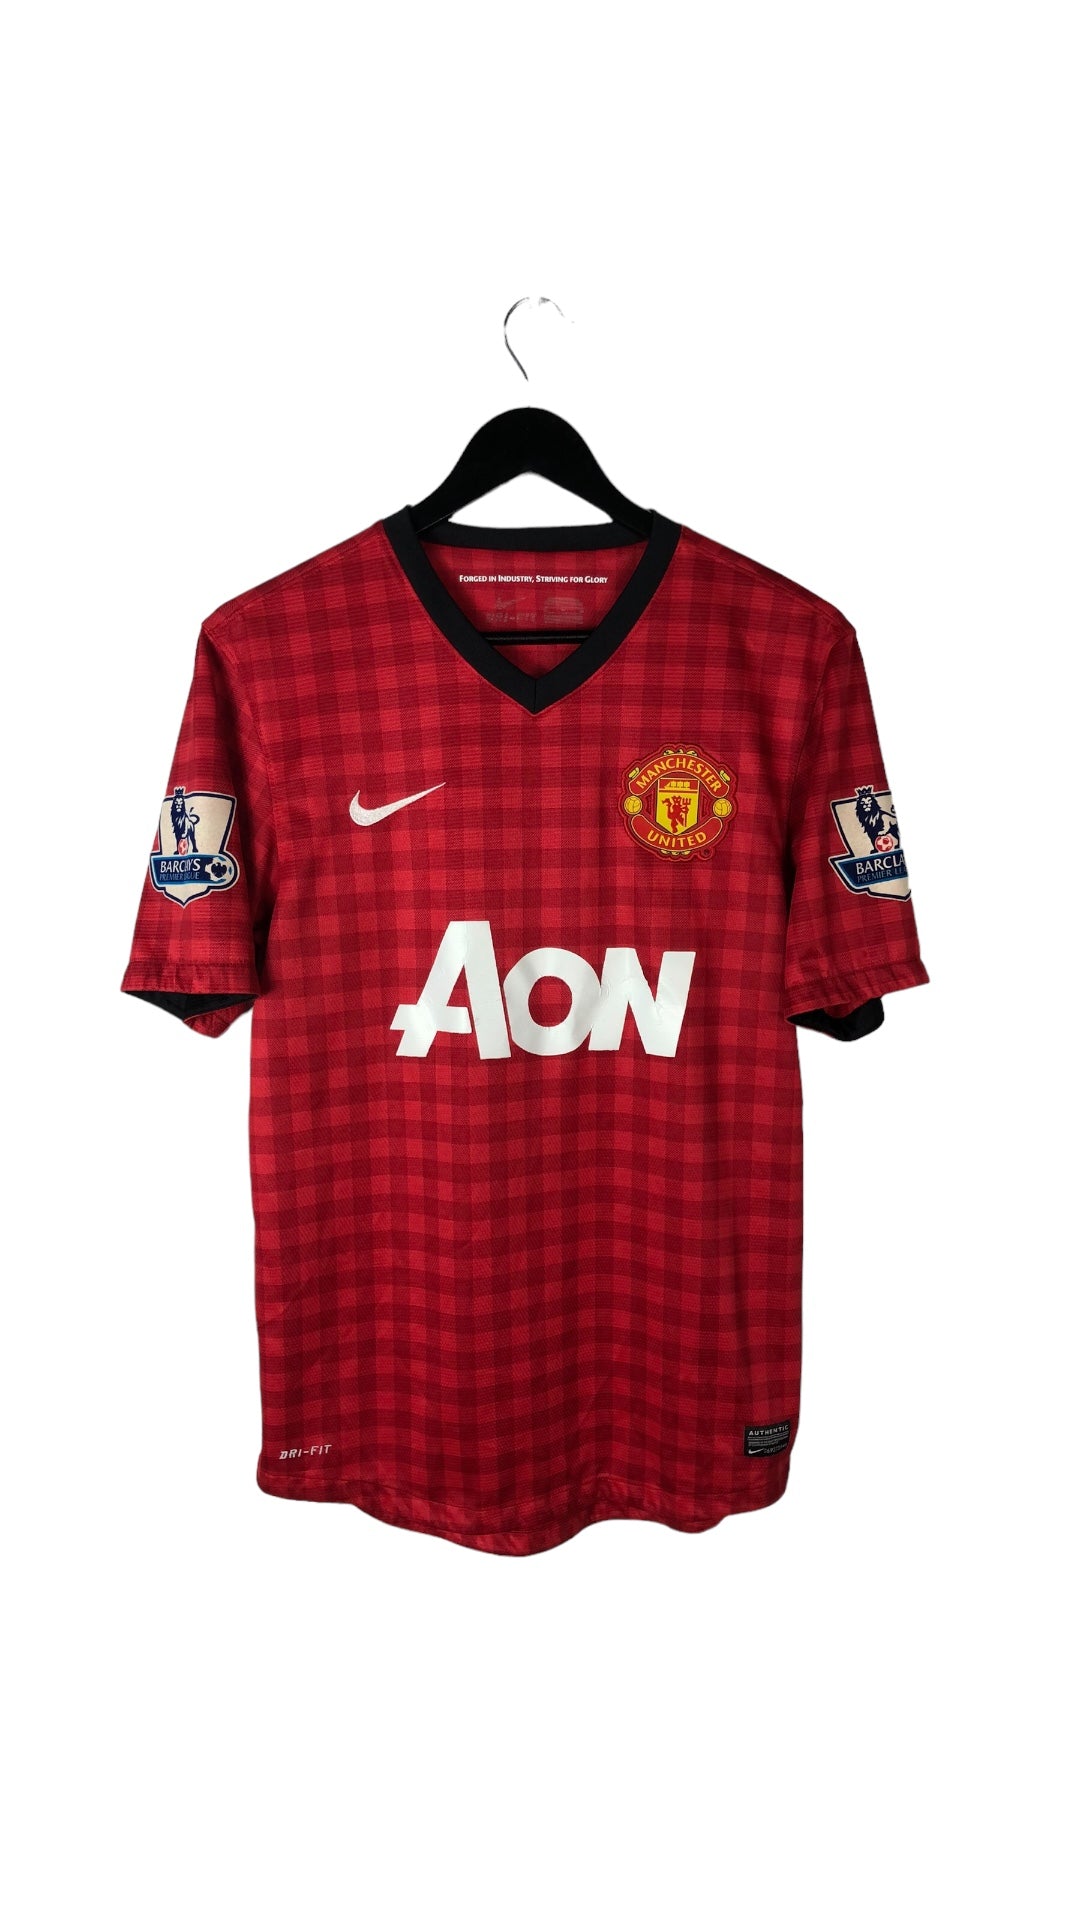 Nike Manchester United AON Red Jersey Sz M